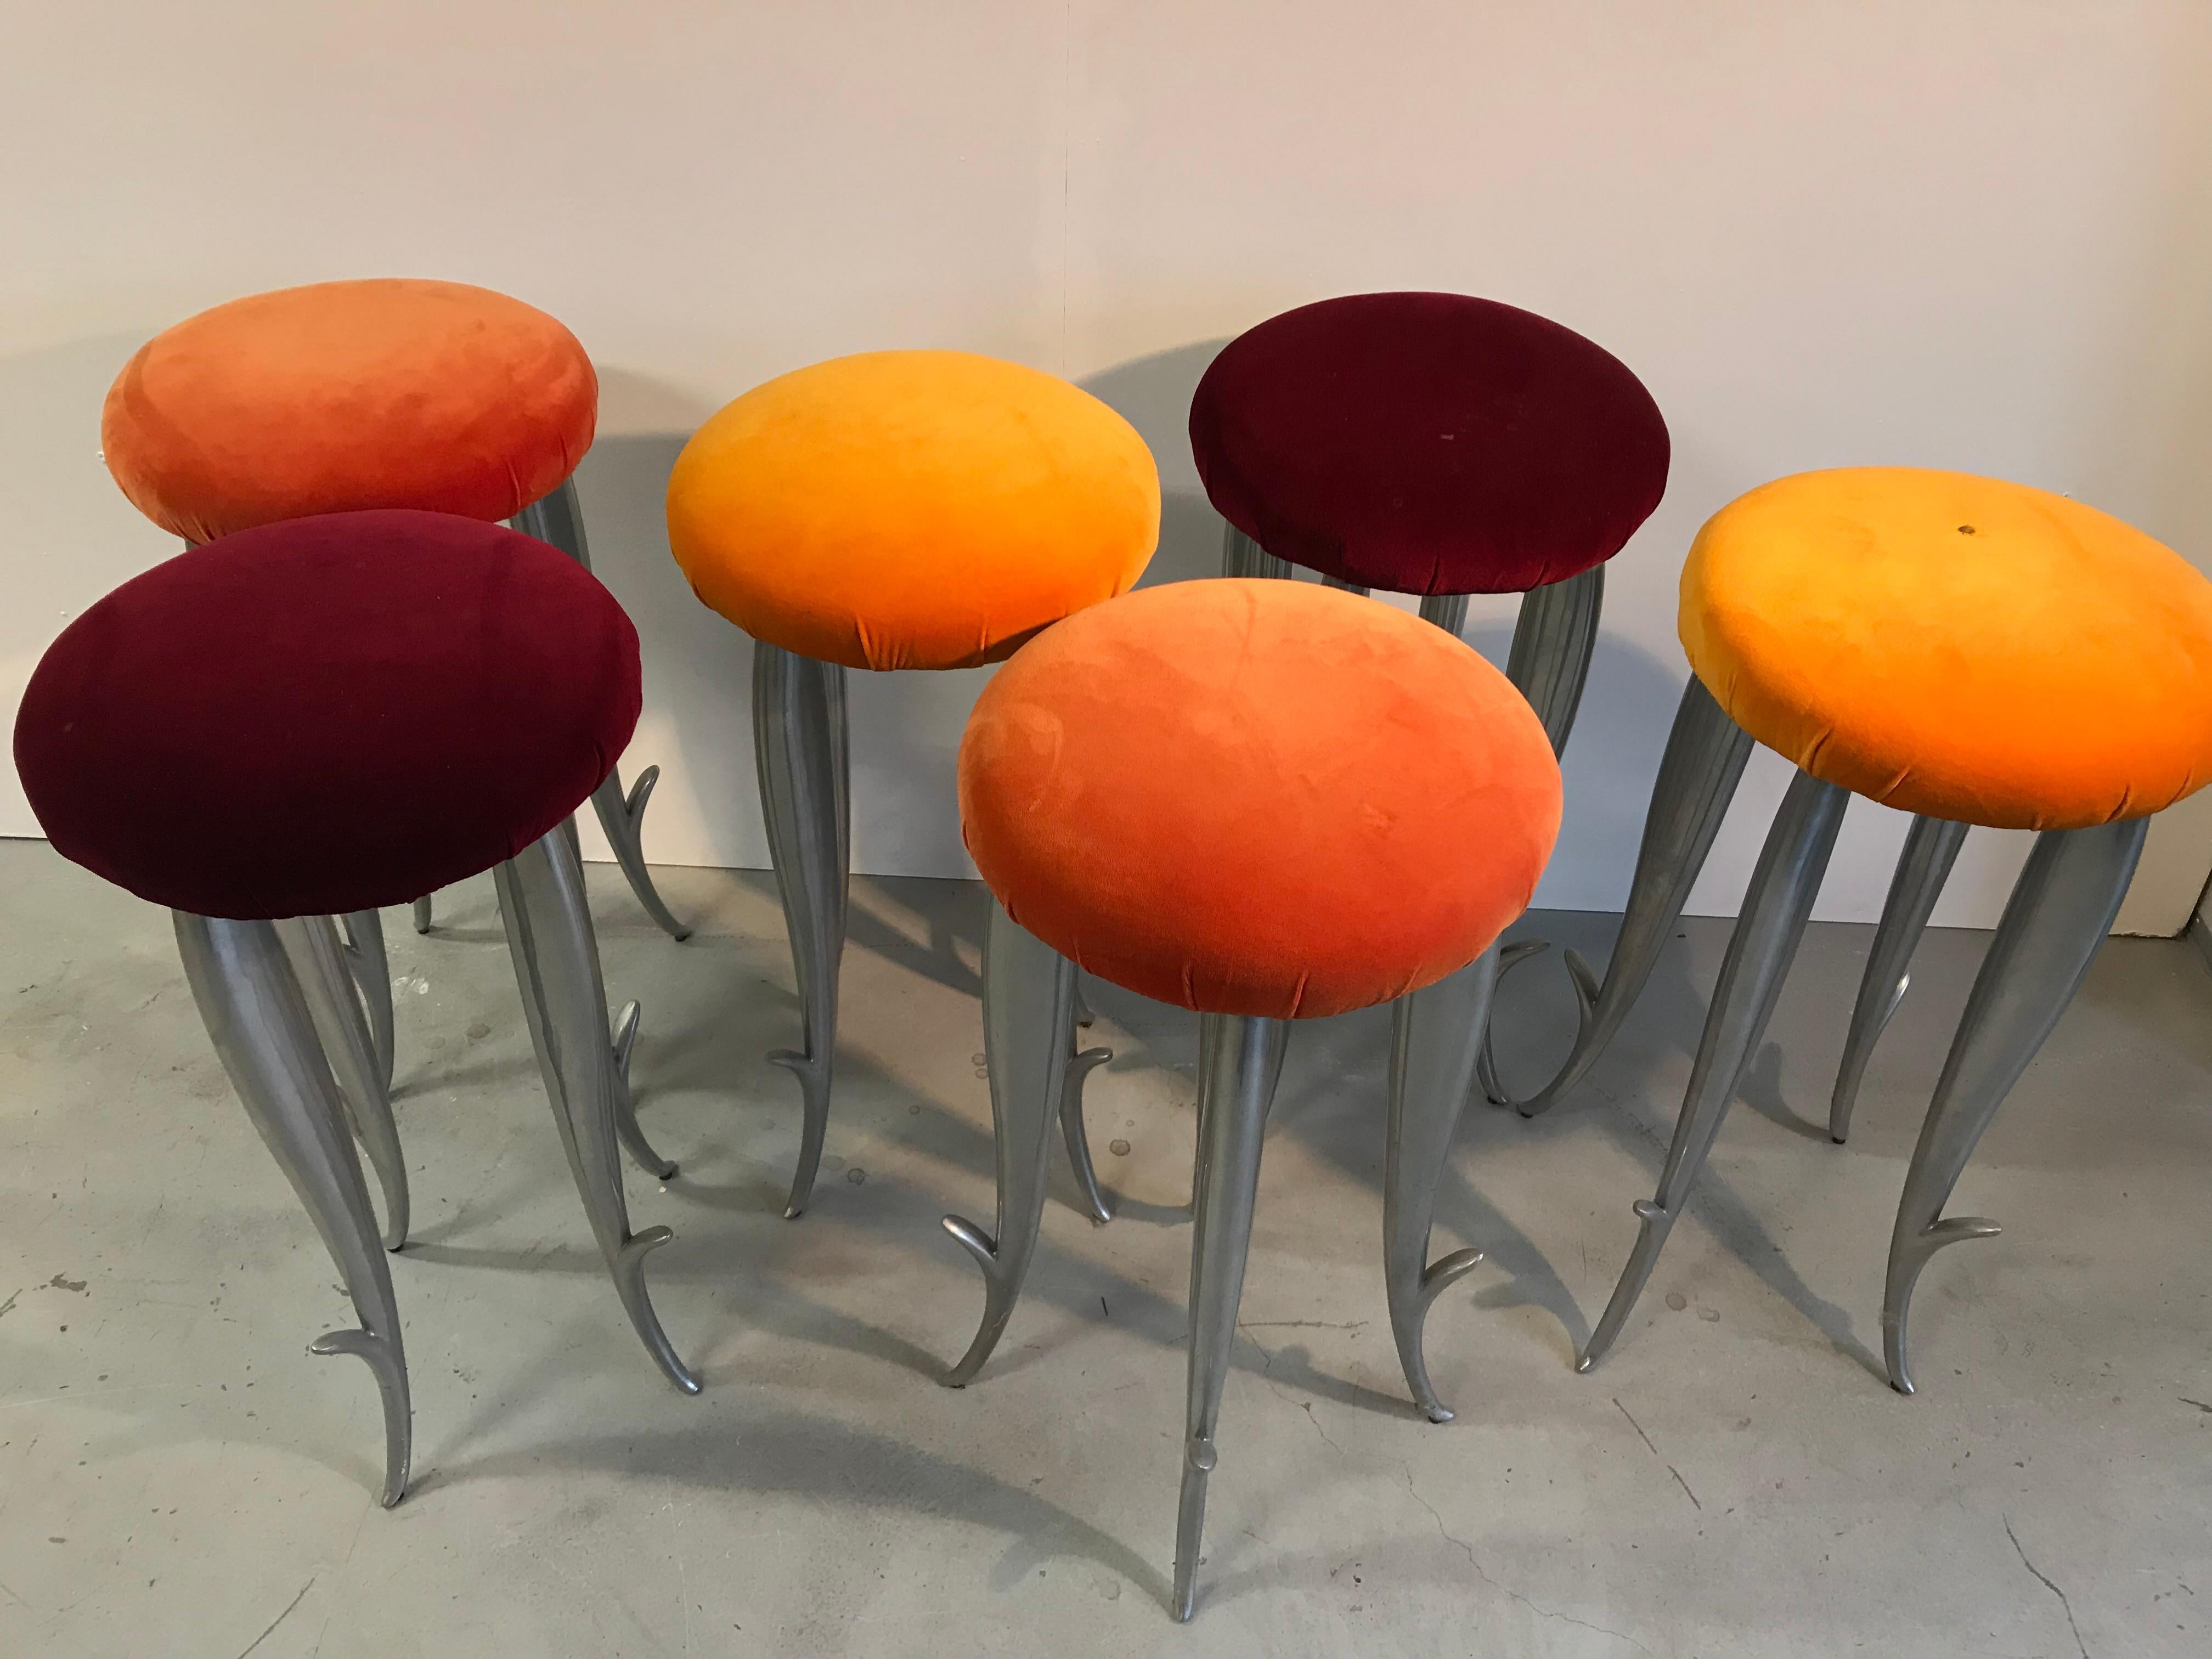 Set of 6 aluminium bar stools designed by the French designer Philippe Starck .They are called Royalton. He is known for his wide range of designs and those stools are a great example. Very sturdy yet elegant, very heavy and refined at the same time.